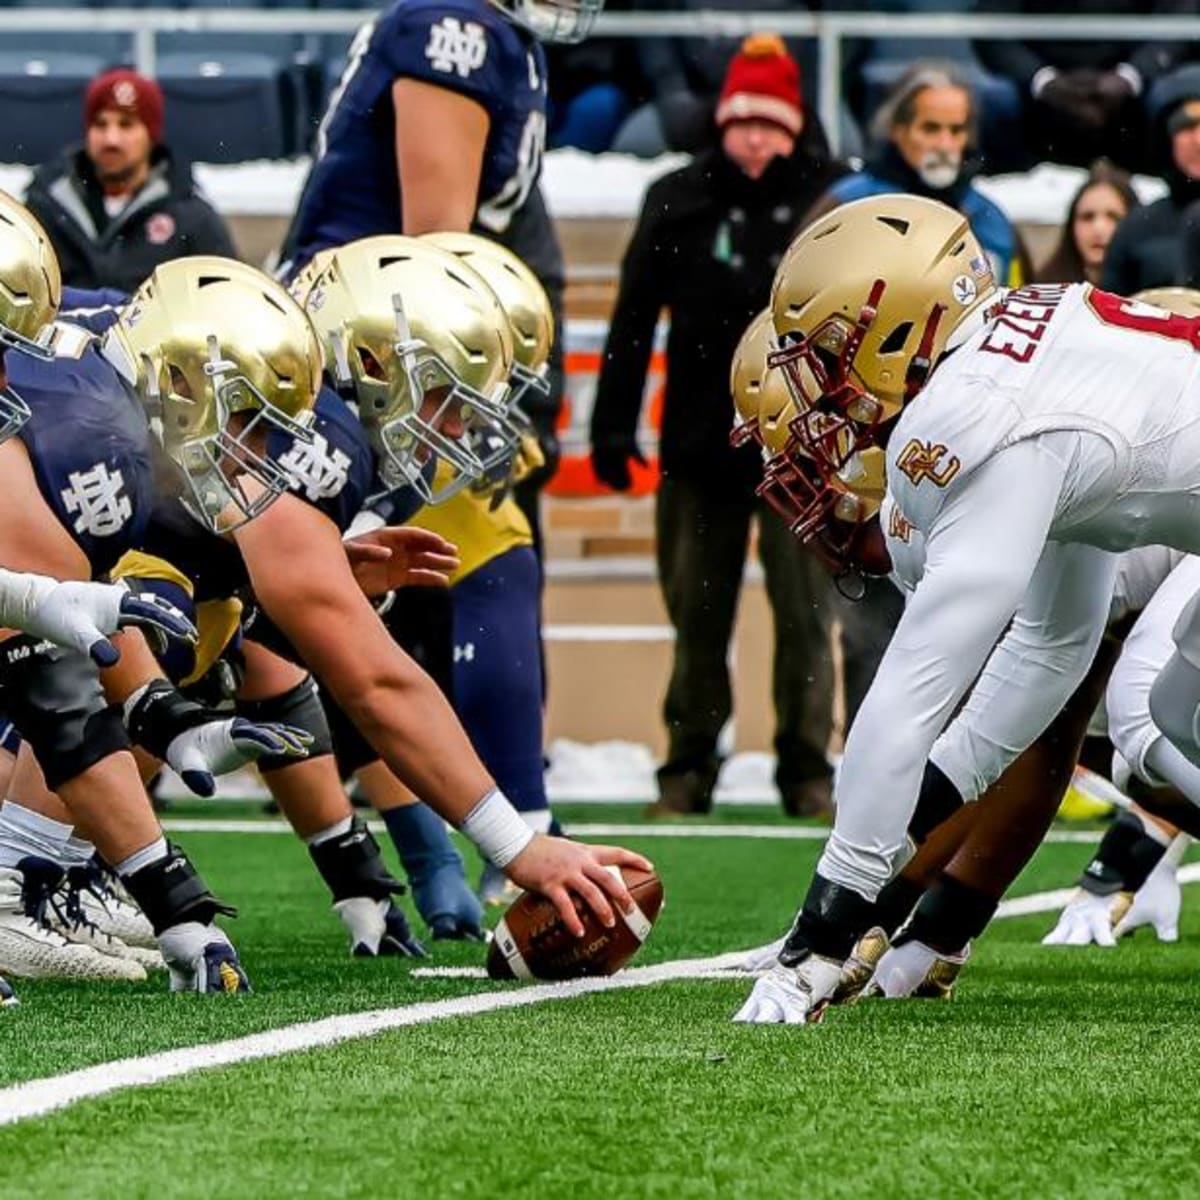 Notre Dame defeats Boston College Football, 44-0, in the Biggest